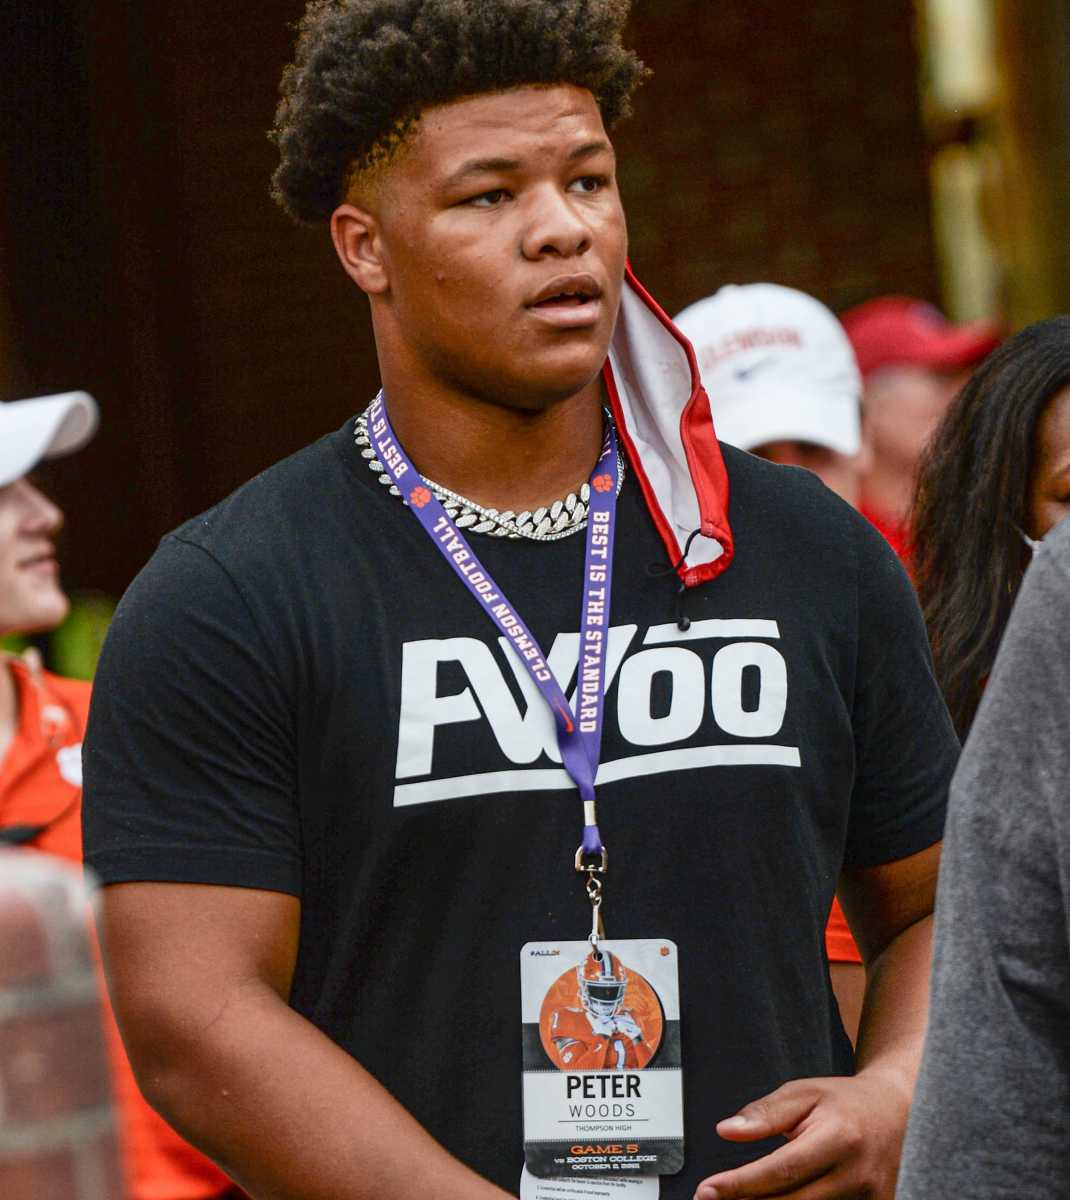 Peter Woods, a 2023 defensive lineman from Alabaster, Alabama, before the game with Clemson and Boston College in Clemson, S.C. Saturday, October 2, 2021.